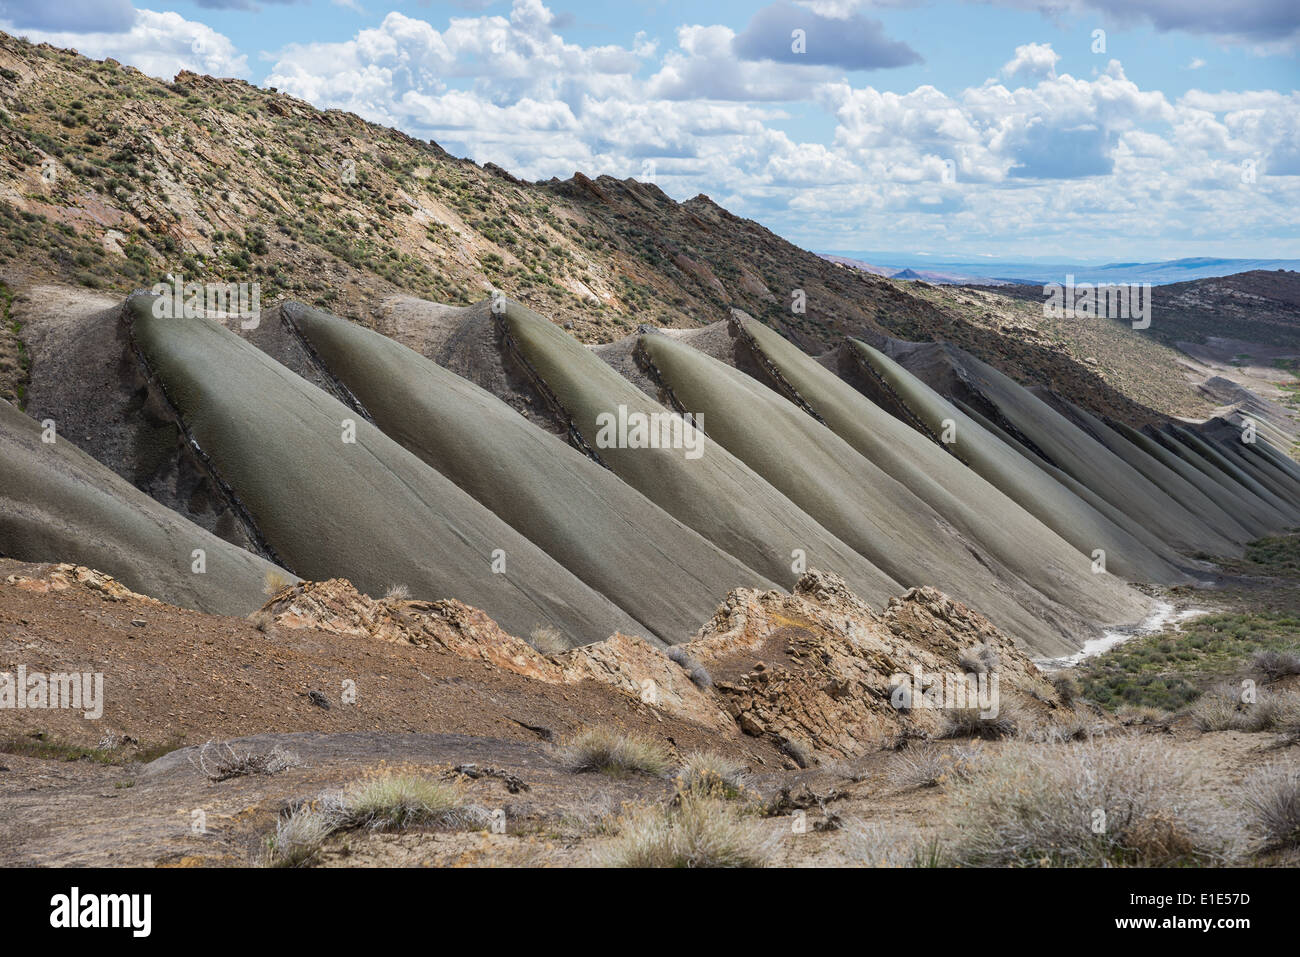 A gray sandstone formation was eroded by water to form interesting pattern. Wyoming, USA. Stock Photo